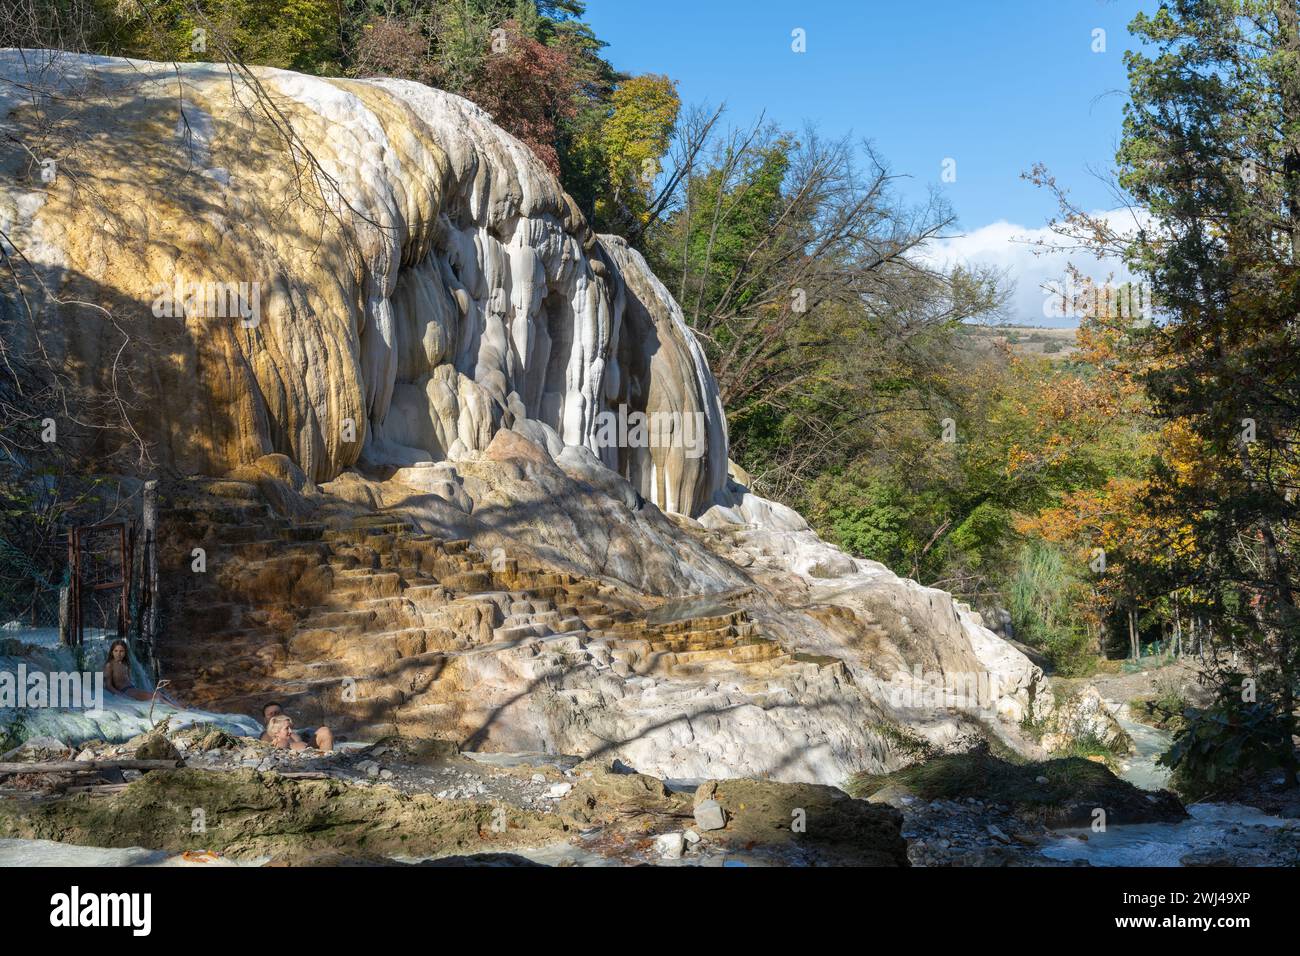 People enjoying the hot springs of Bagni San Filippo amidst the calcium carbonate deposits and many pools Stock Photo